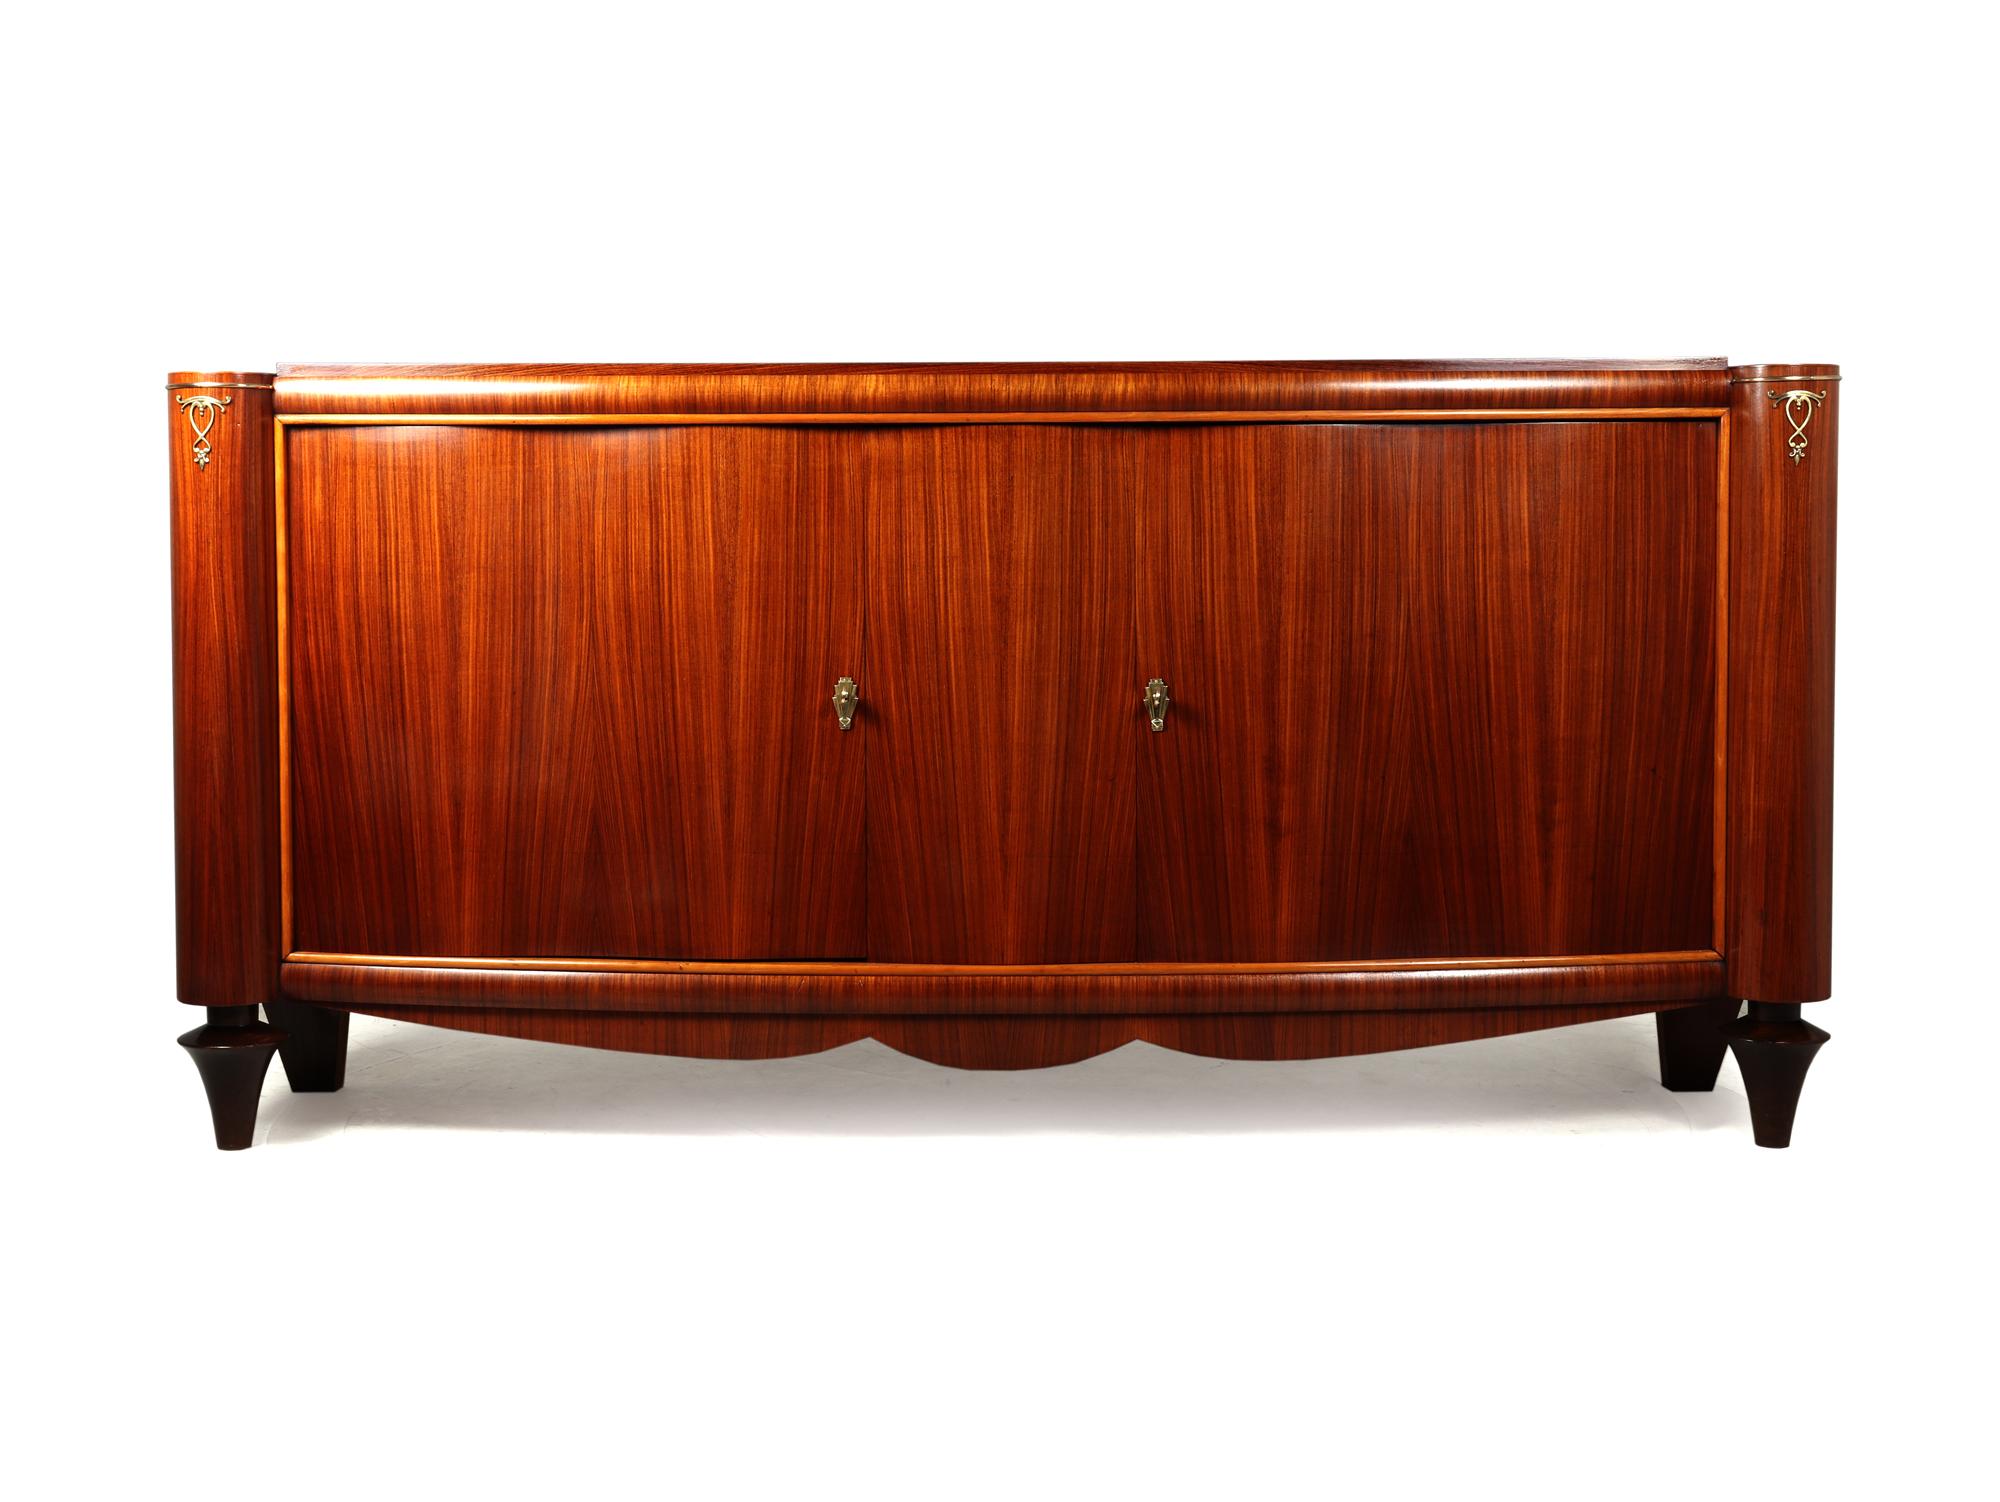 A large French Art Deco sideboard very much in the manner of Jules Leleu produced from Palisander in France in The 1930’s, the sideboard has two large shaped opening doors with shelf behind

the sideboard has been full polished by hand and is in